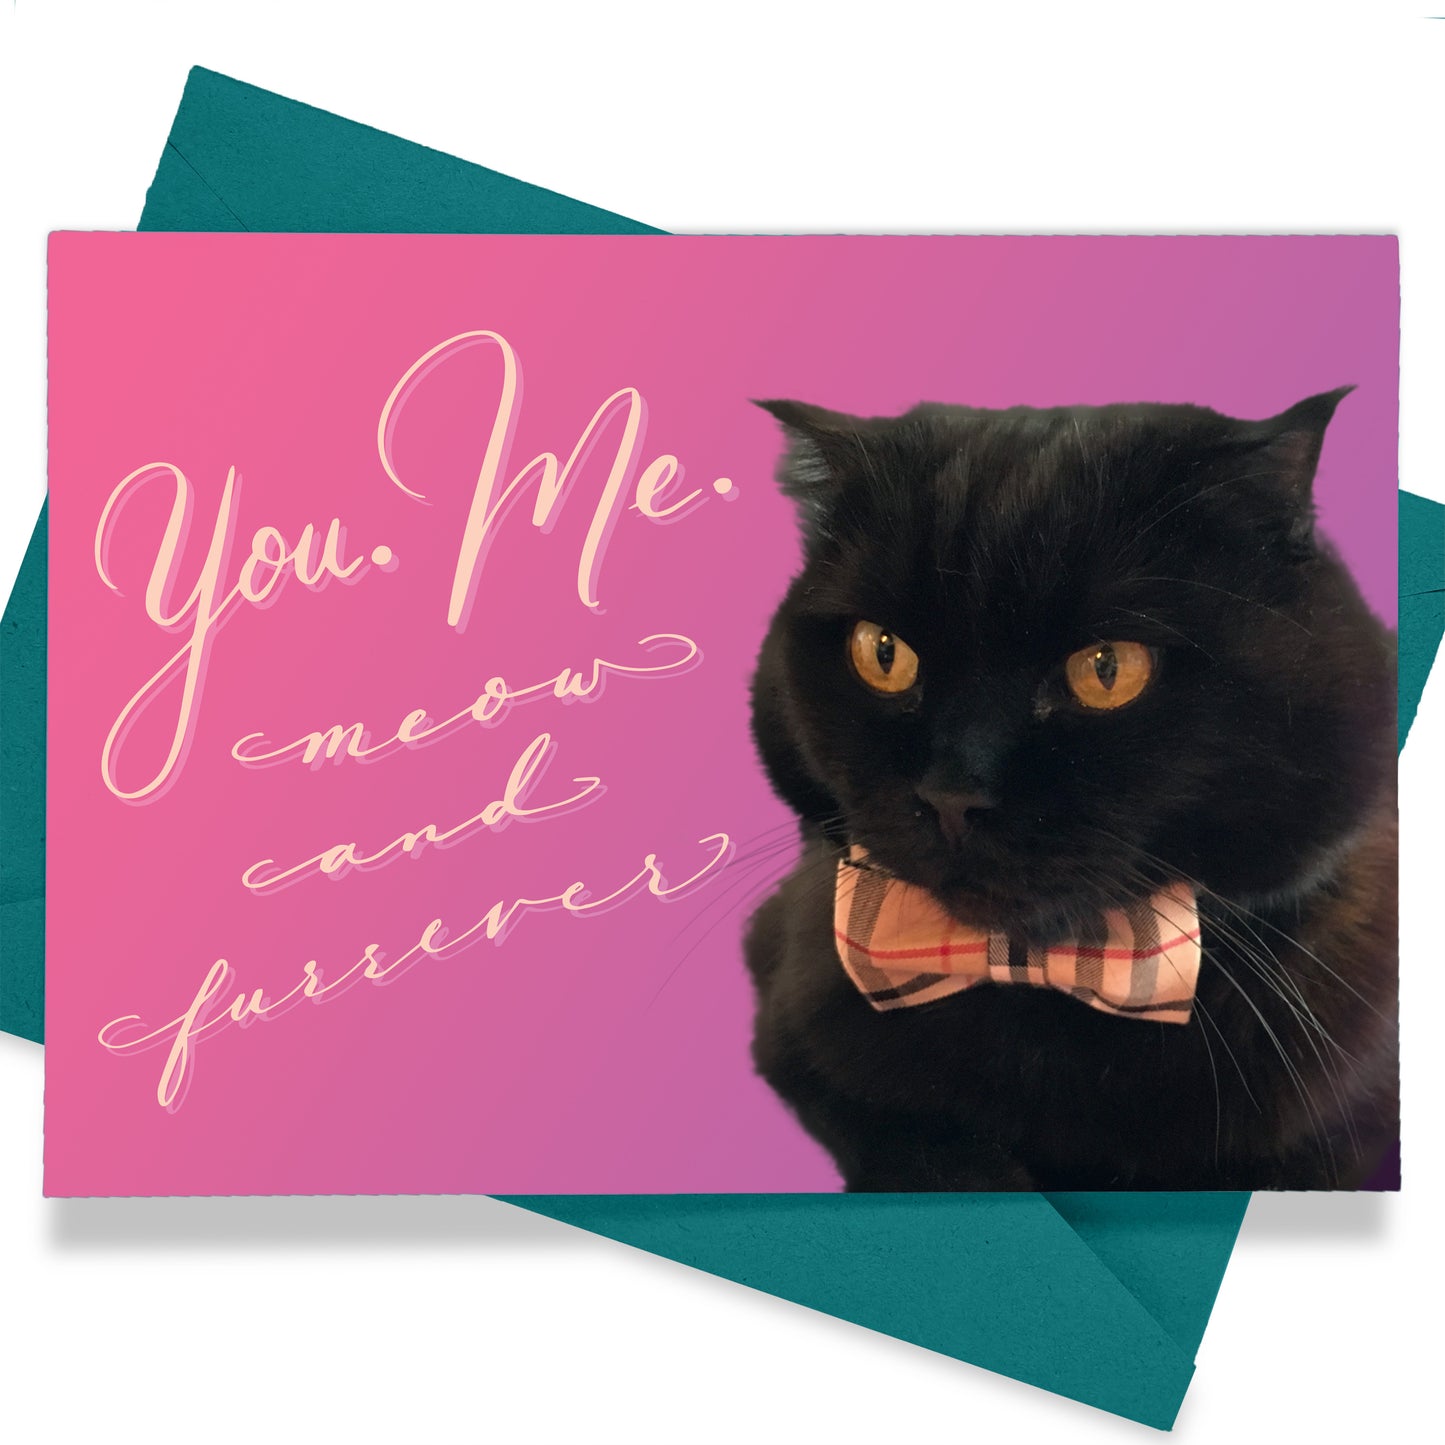 A thumbnail view of the greeting card: "You. Me. Meow and Furrever"